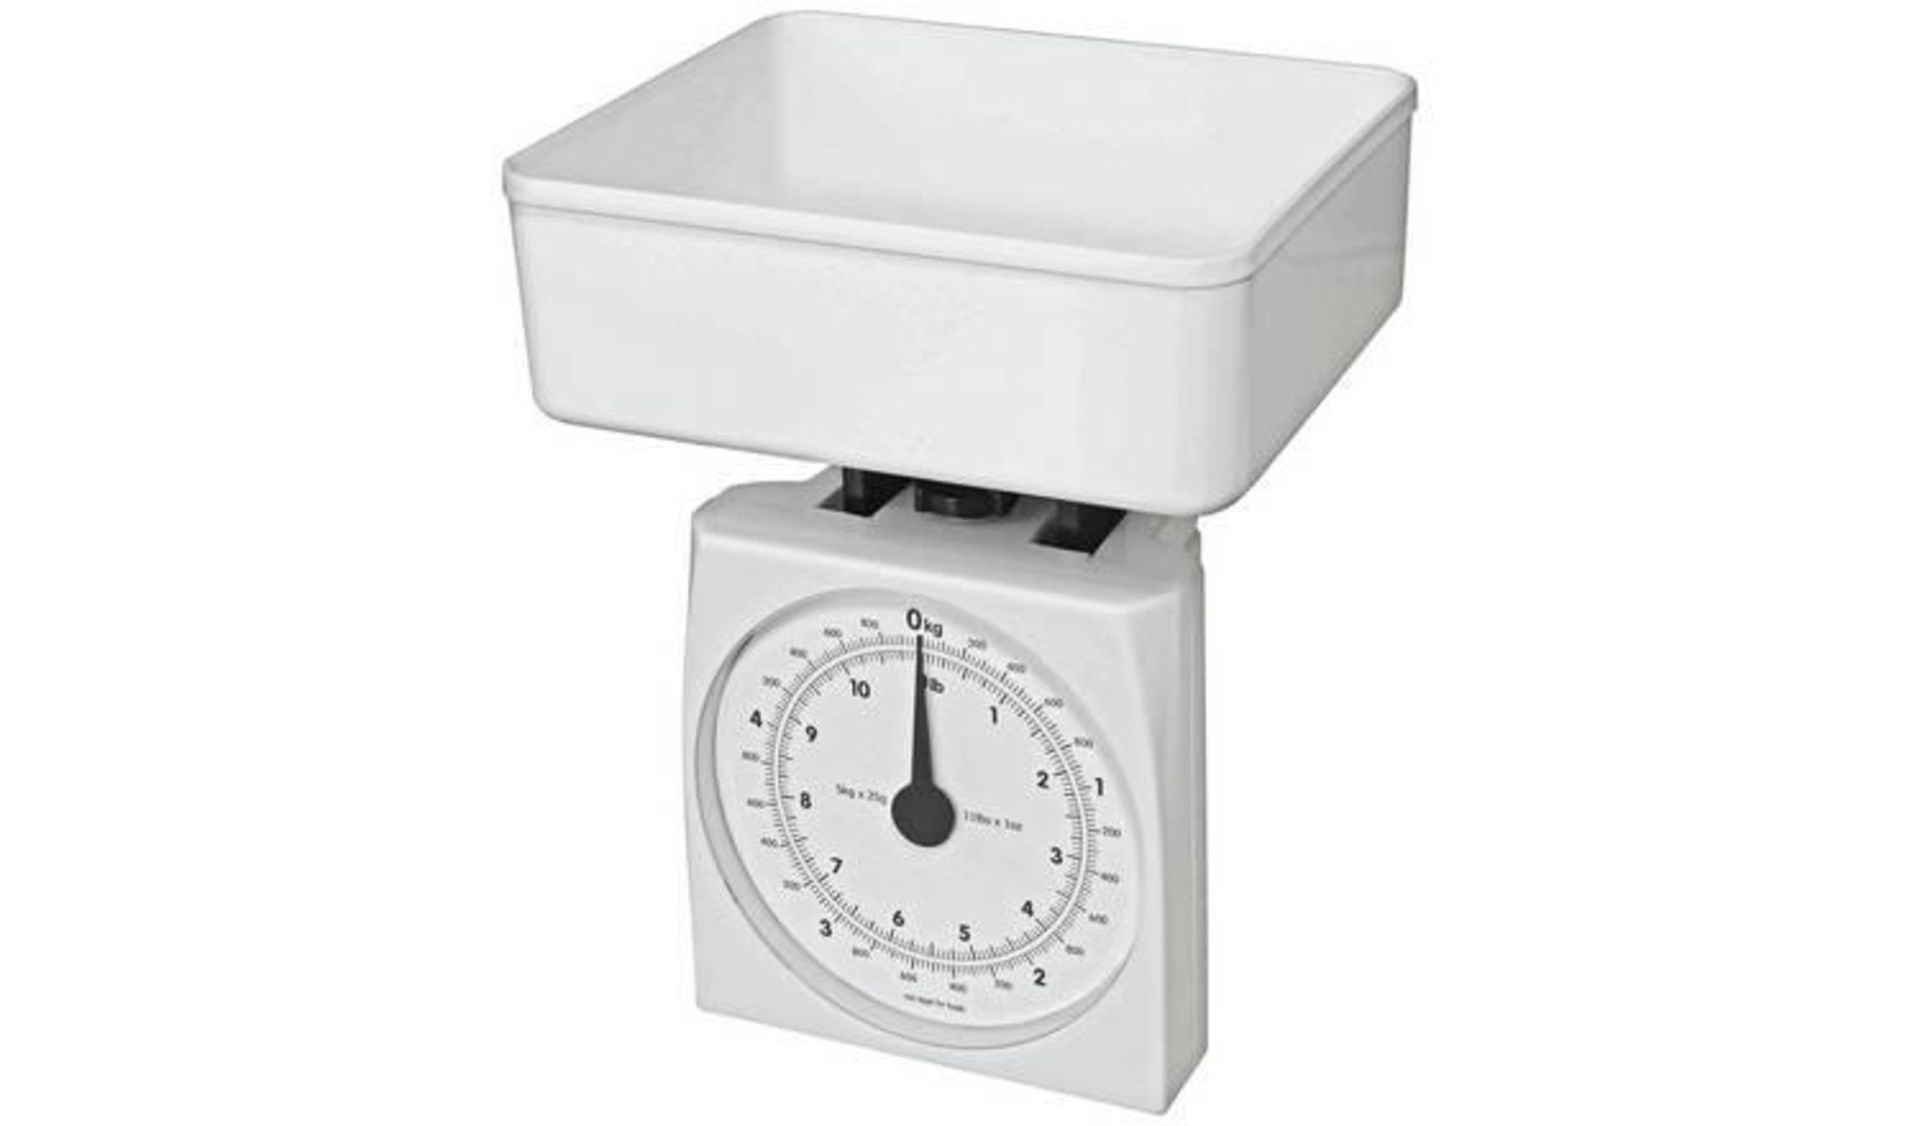 Argos Home Mechanical Scale £6.00 RRP